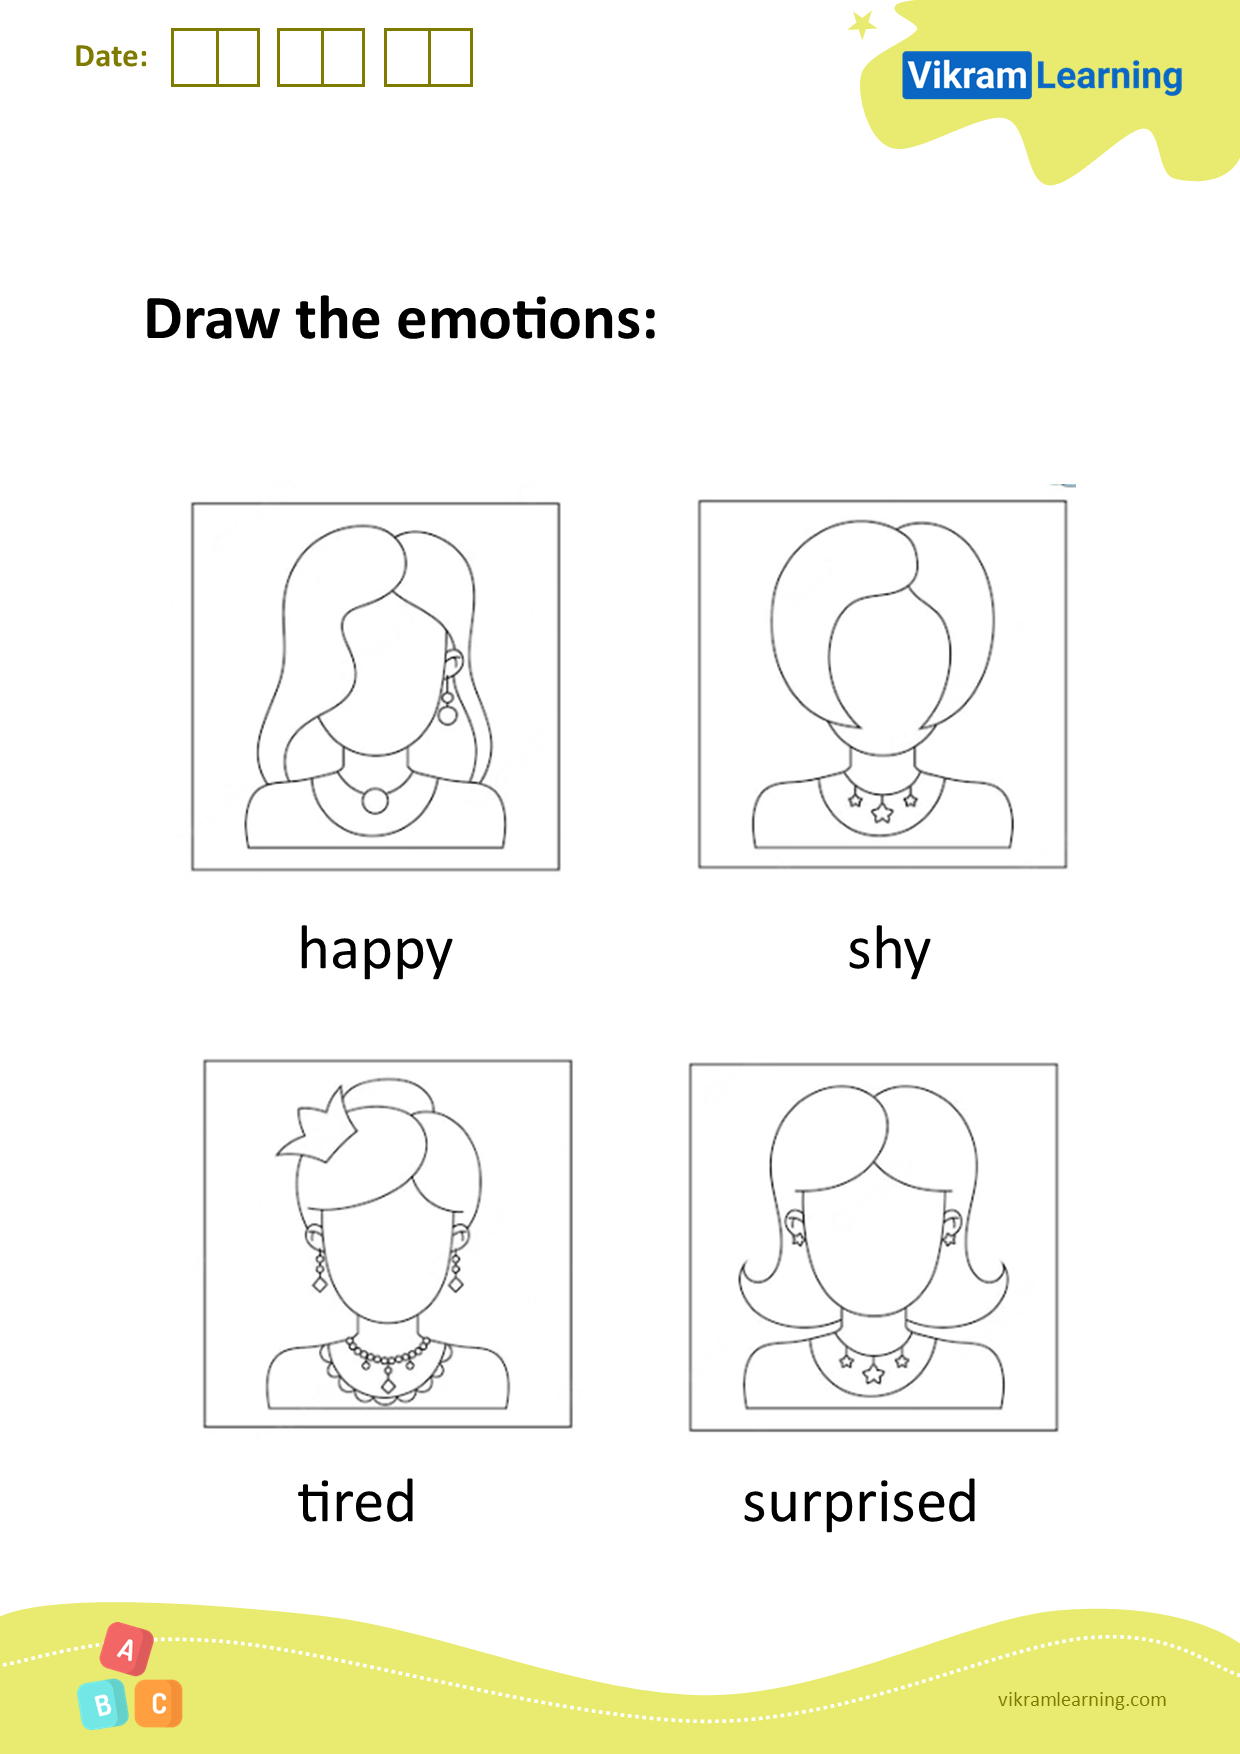 Download draw the emotions worksheets